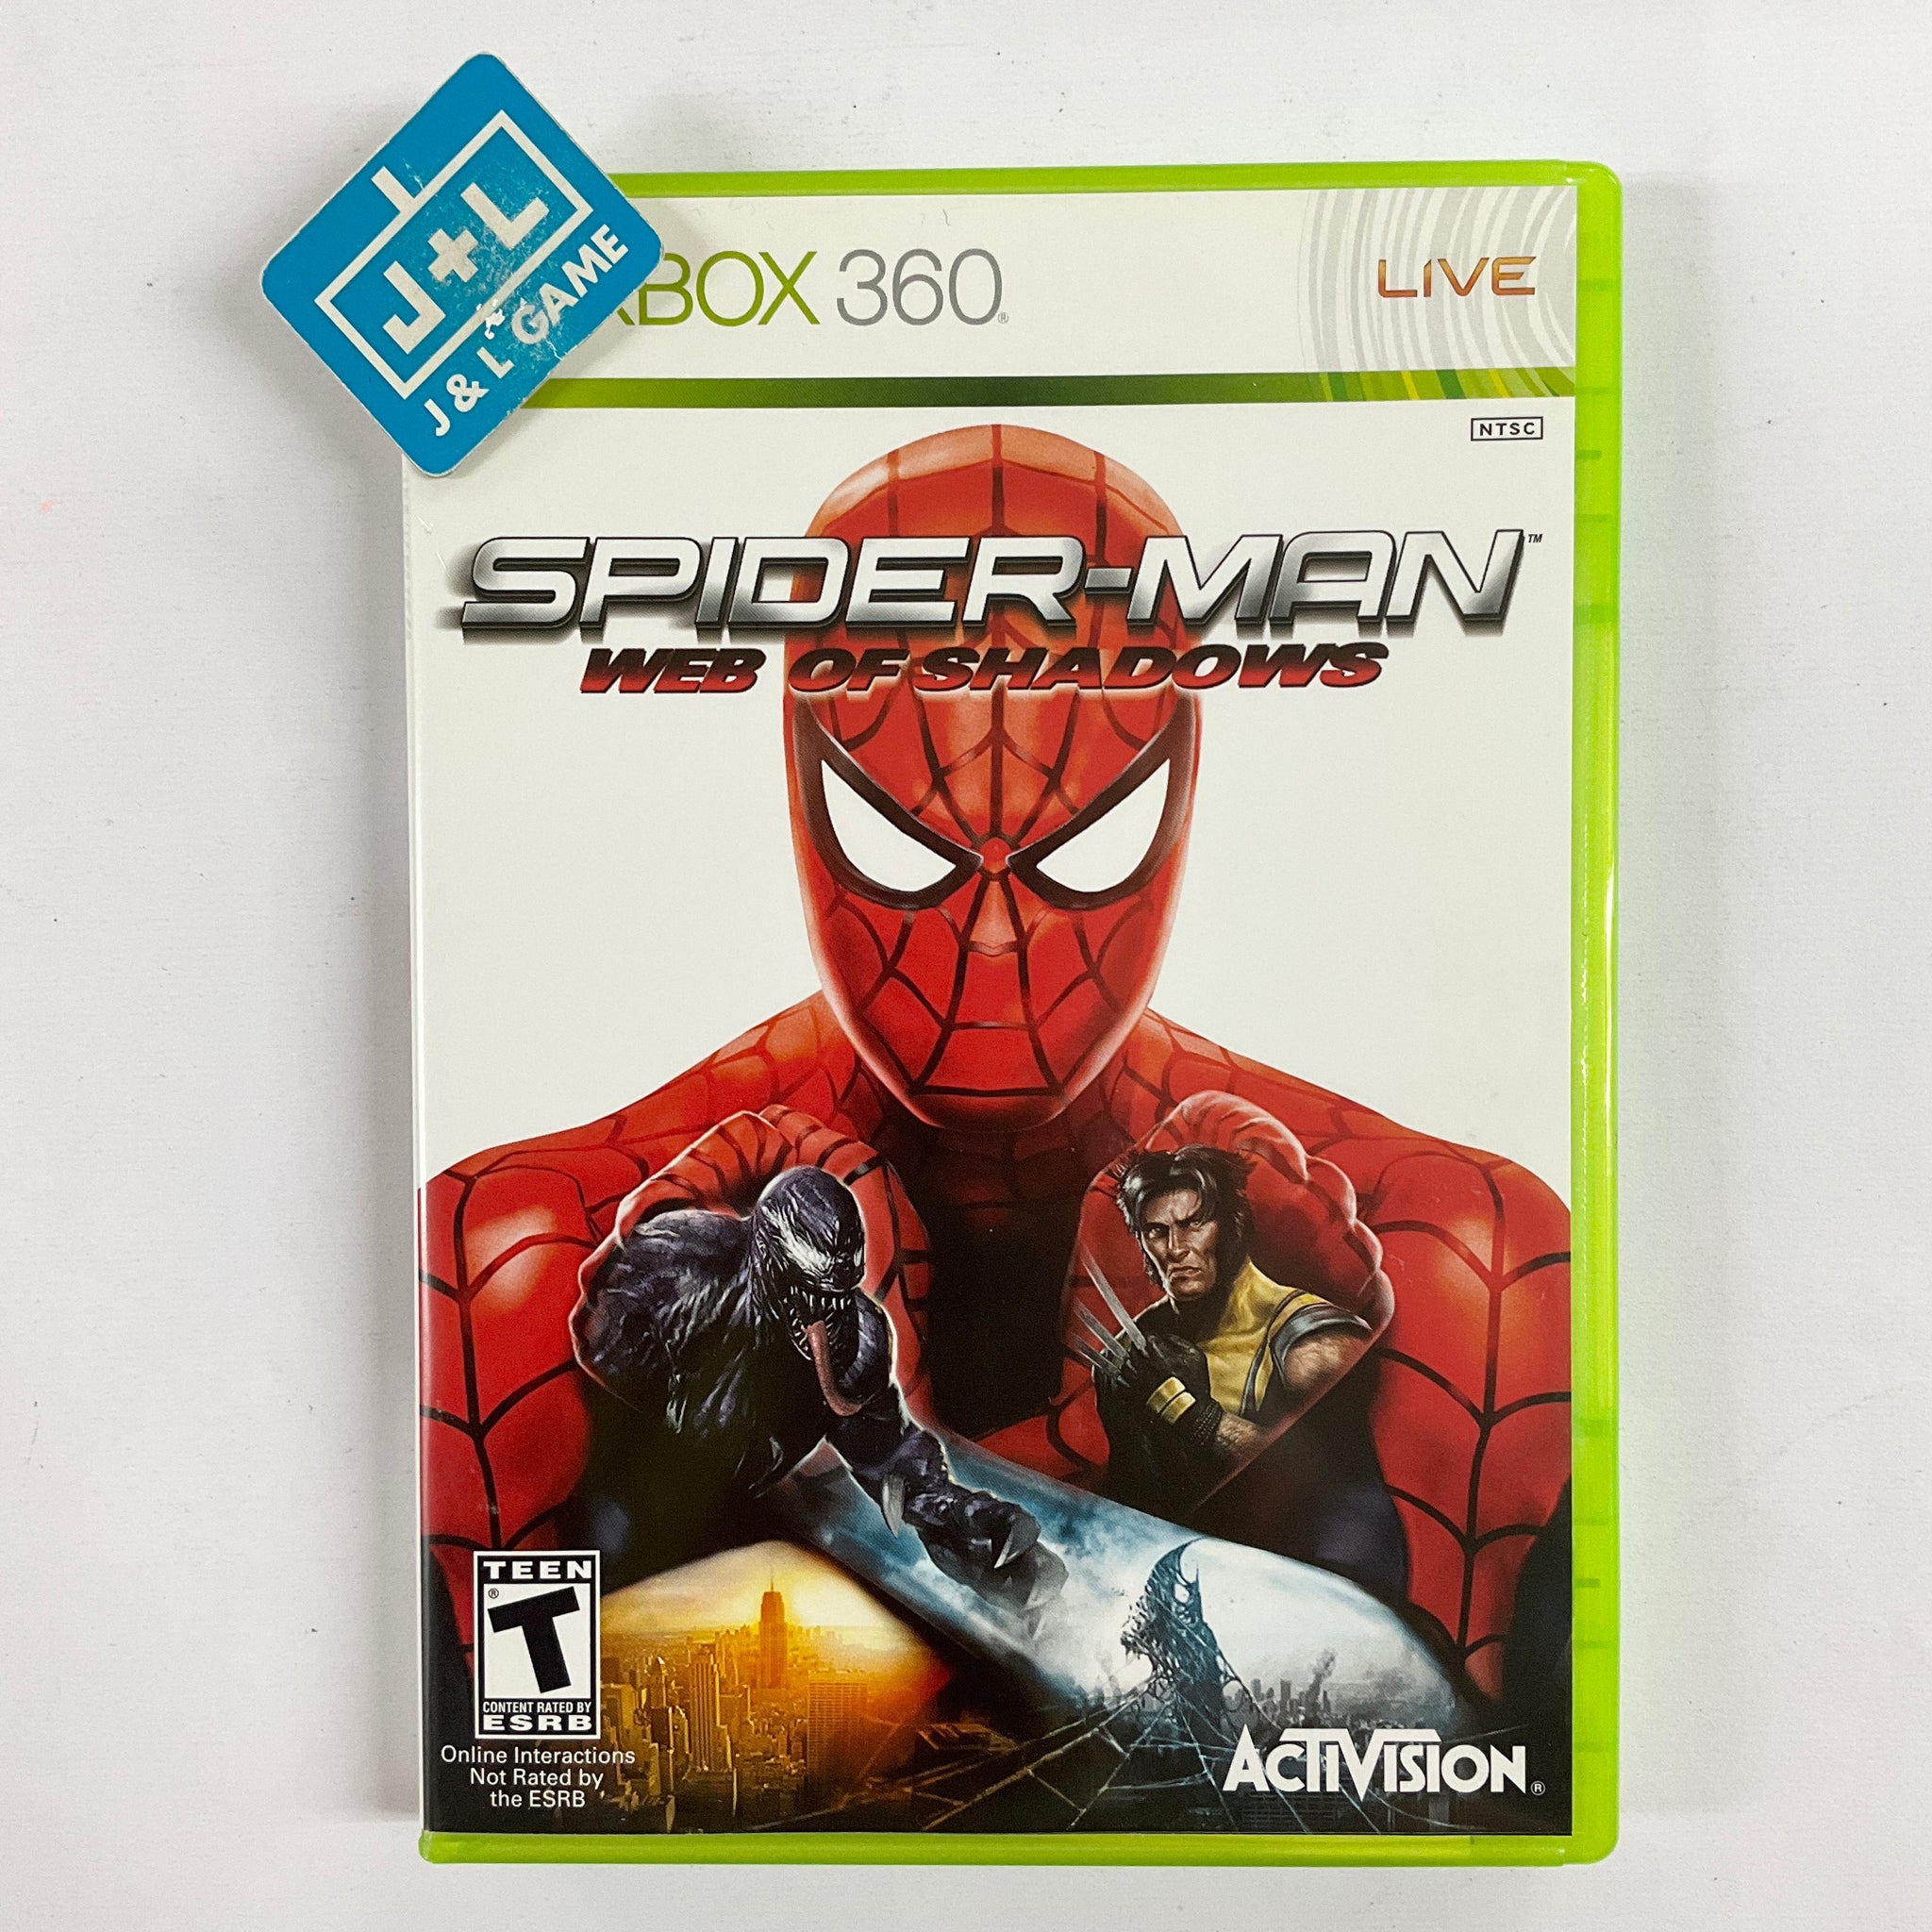 Nintendo Wii Spider-Man: Web of Shadows Video Games for sale